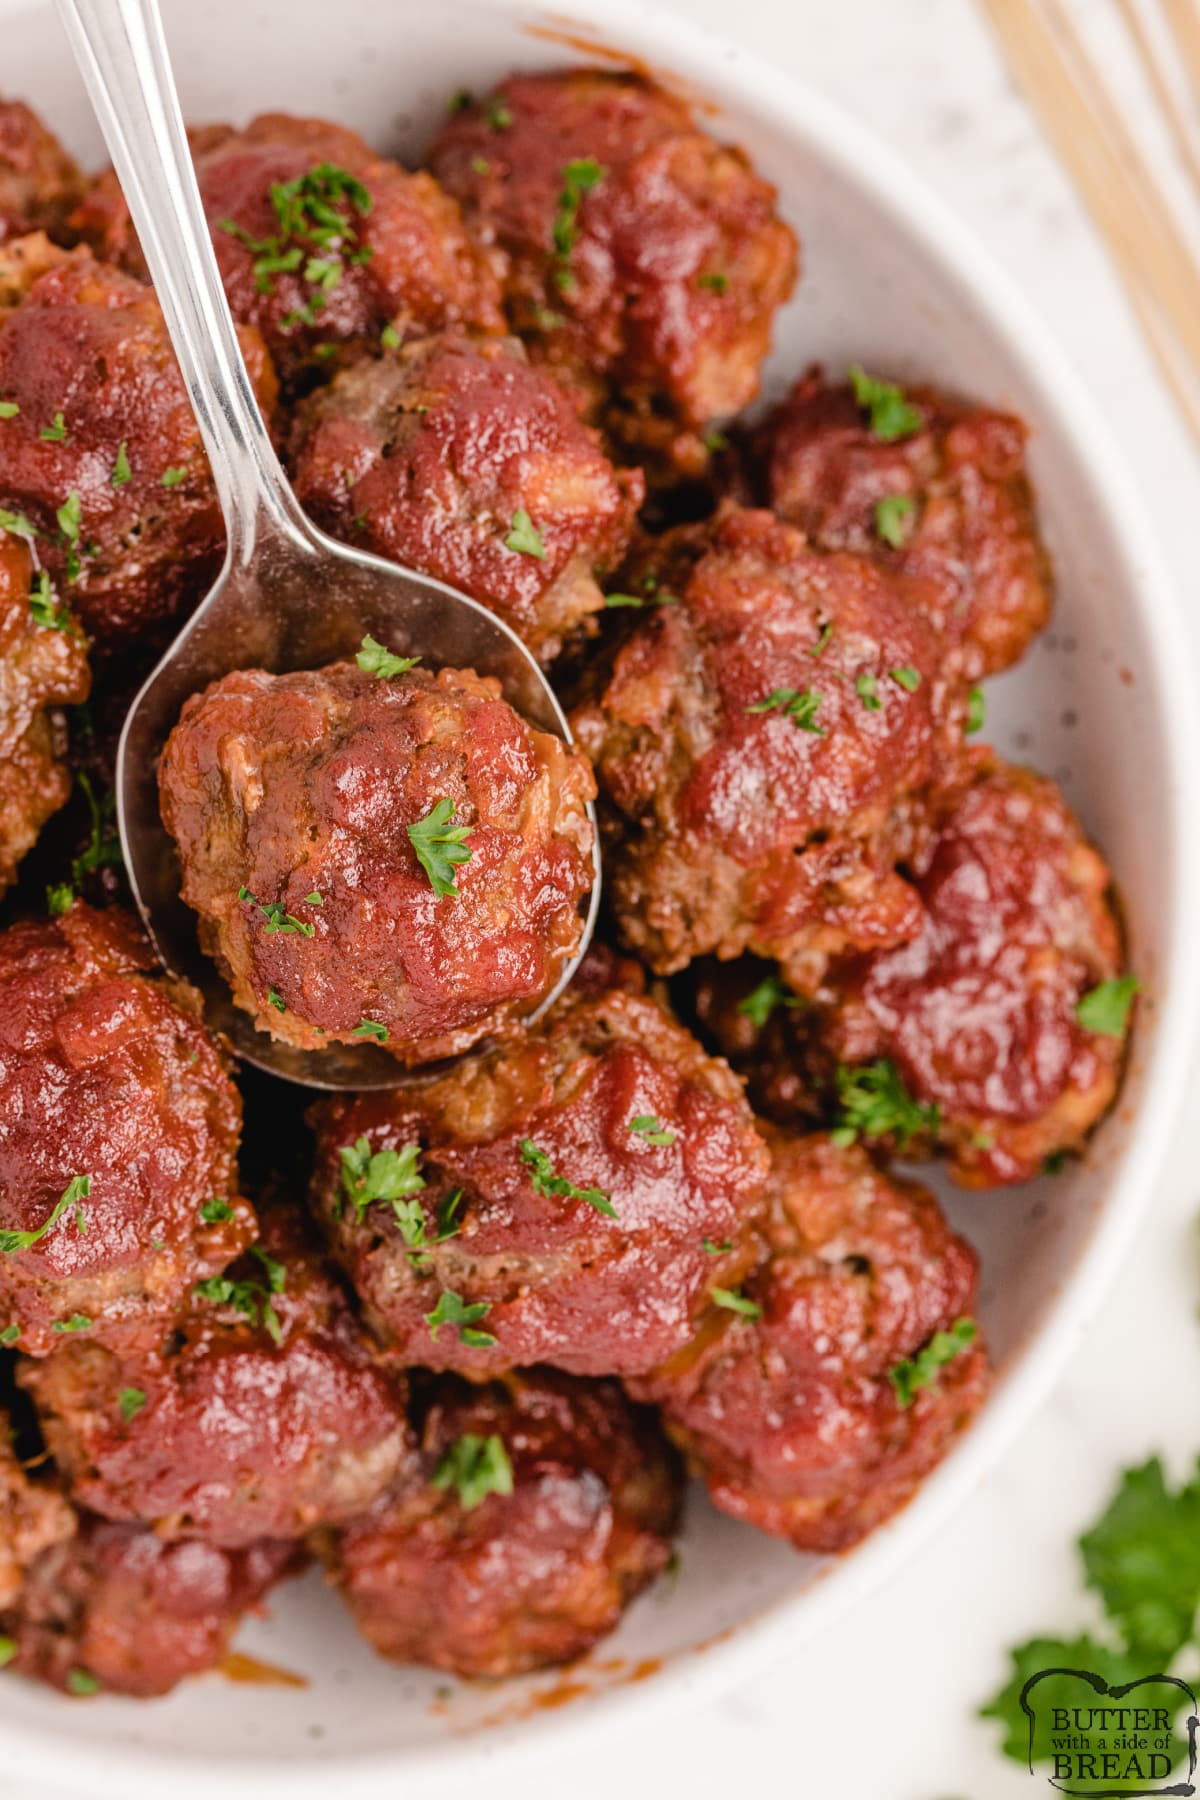 BBQ Meatballs made with ground beef, pork sausage and a delicious homemade barbecue sauce. These meatballs are perfect as an appetizer or serve them over rice for an easy dinner!